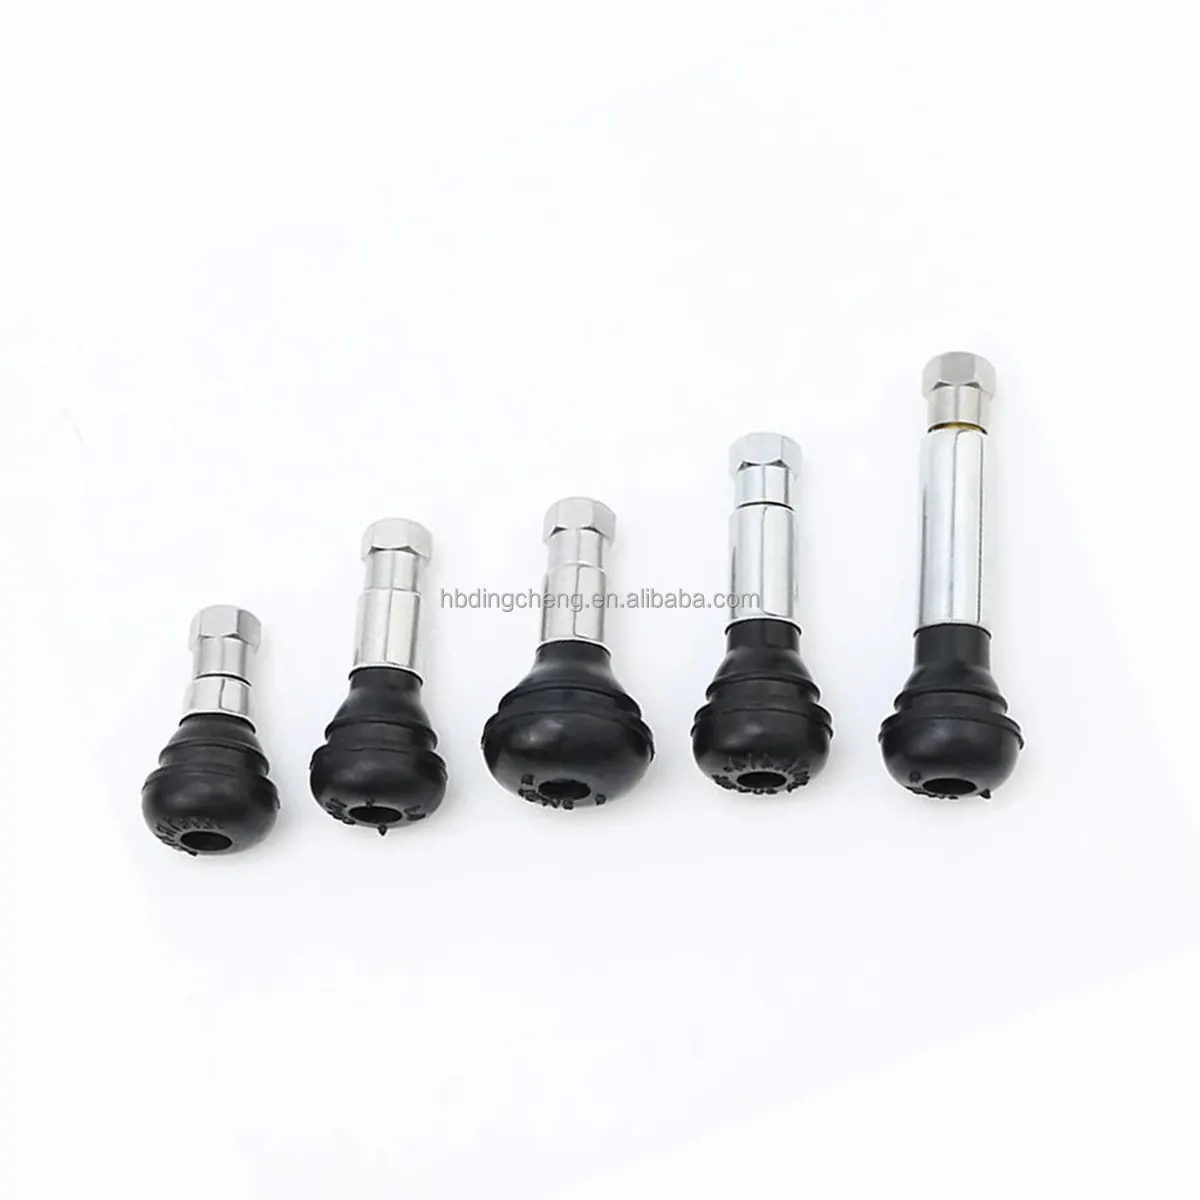 Automotive Tire Spare Parts Tubeless Snap-in Tire Valve Metal Stem TR413C Metal Stem Tyre Valve